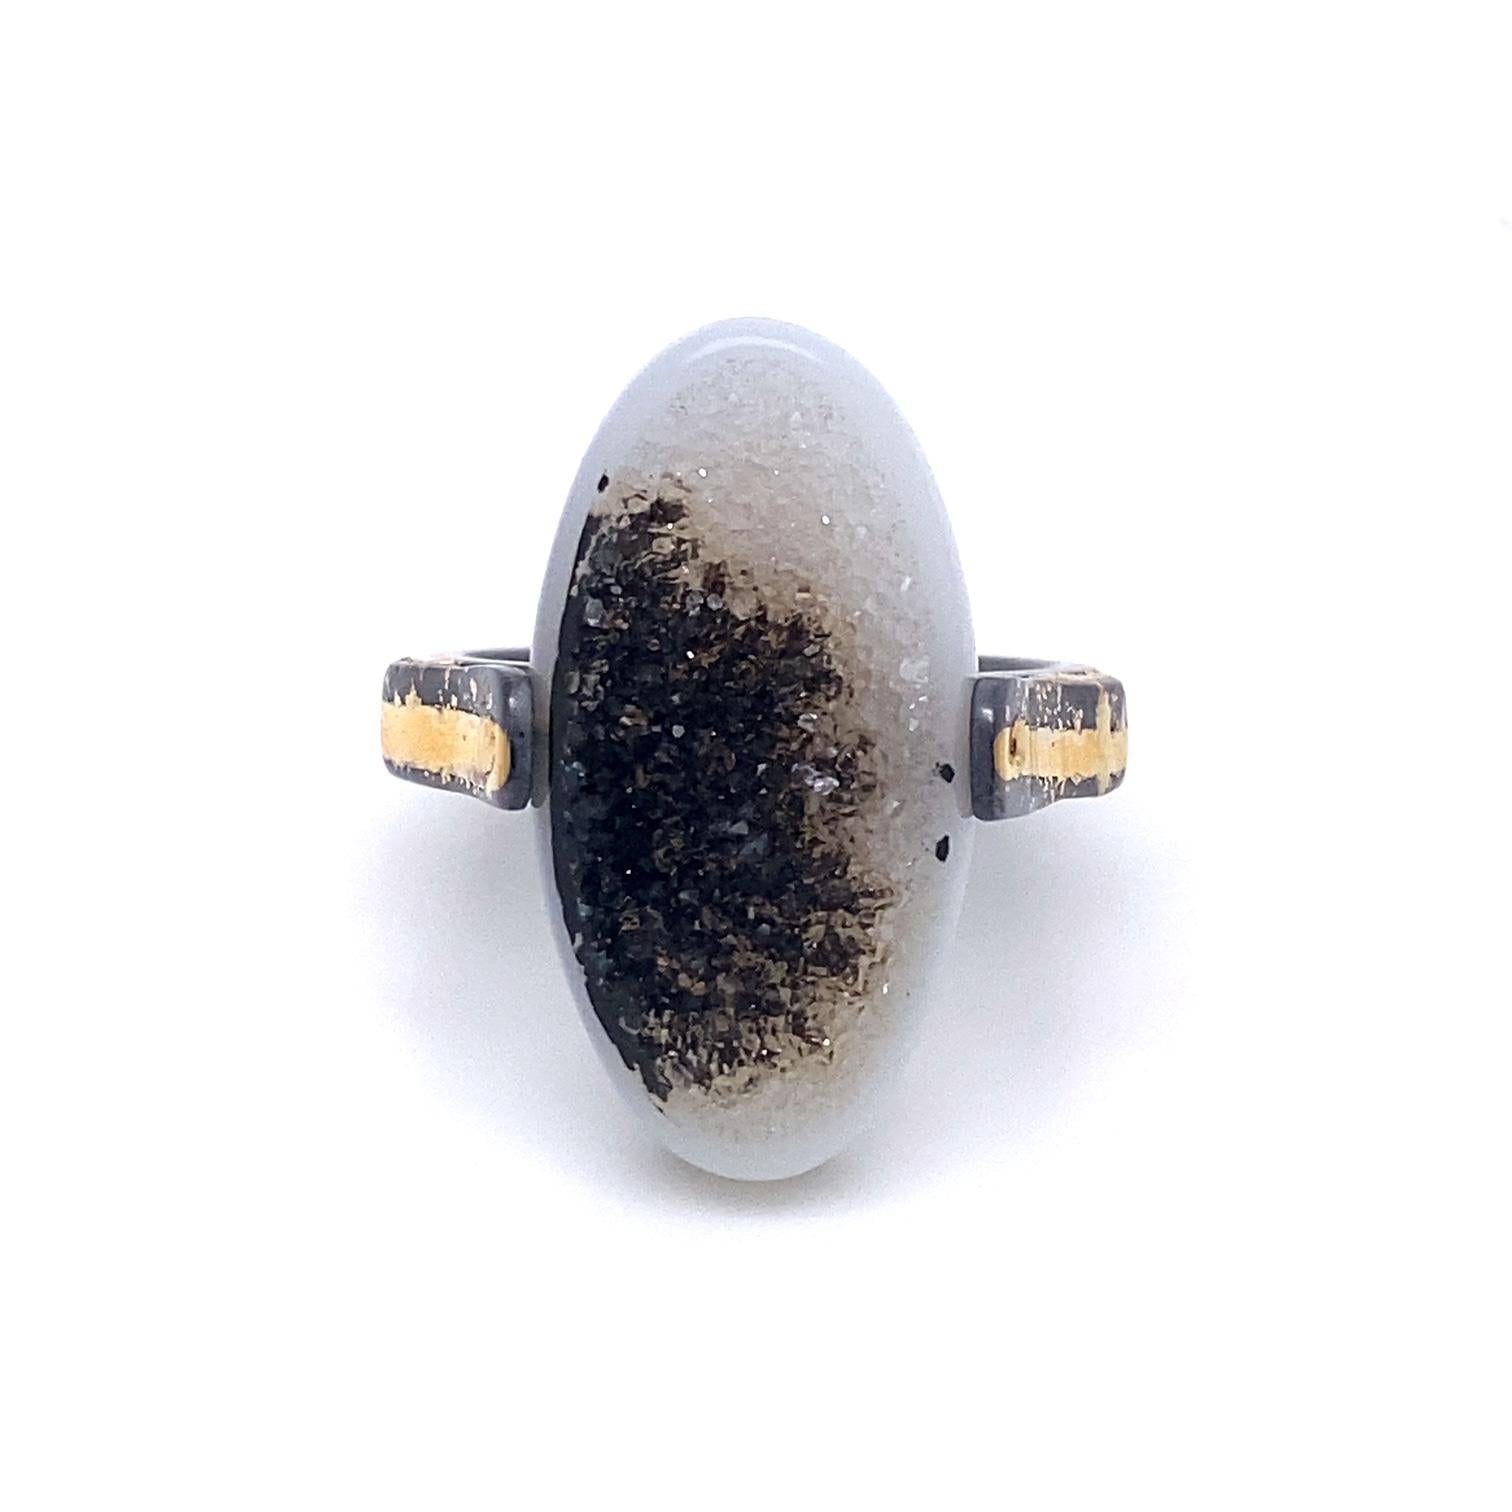 An oxidized sterling silver ring with 18k, and 22k yellow gold, with one oval black and white druzy. Ring size 8. This ring was made and designed by llyn strong.